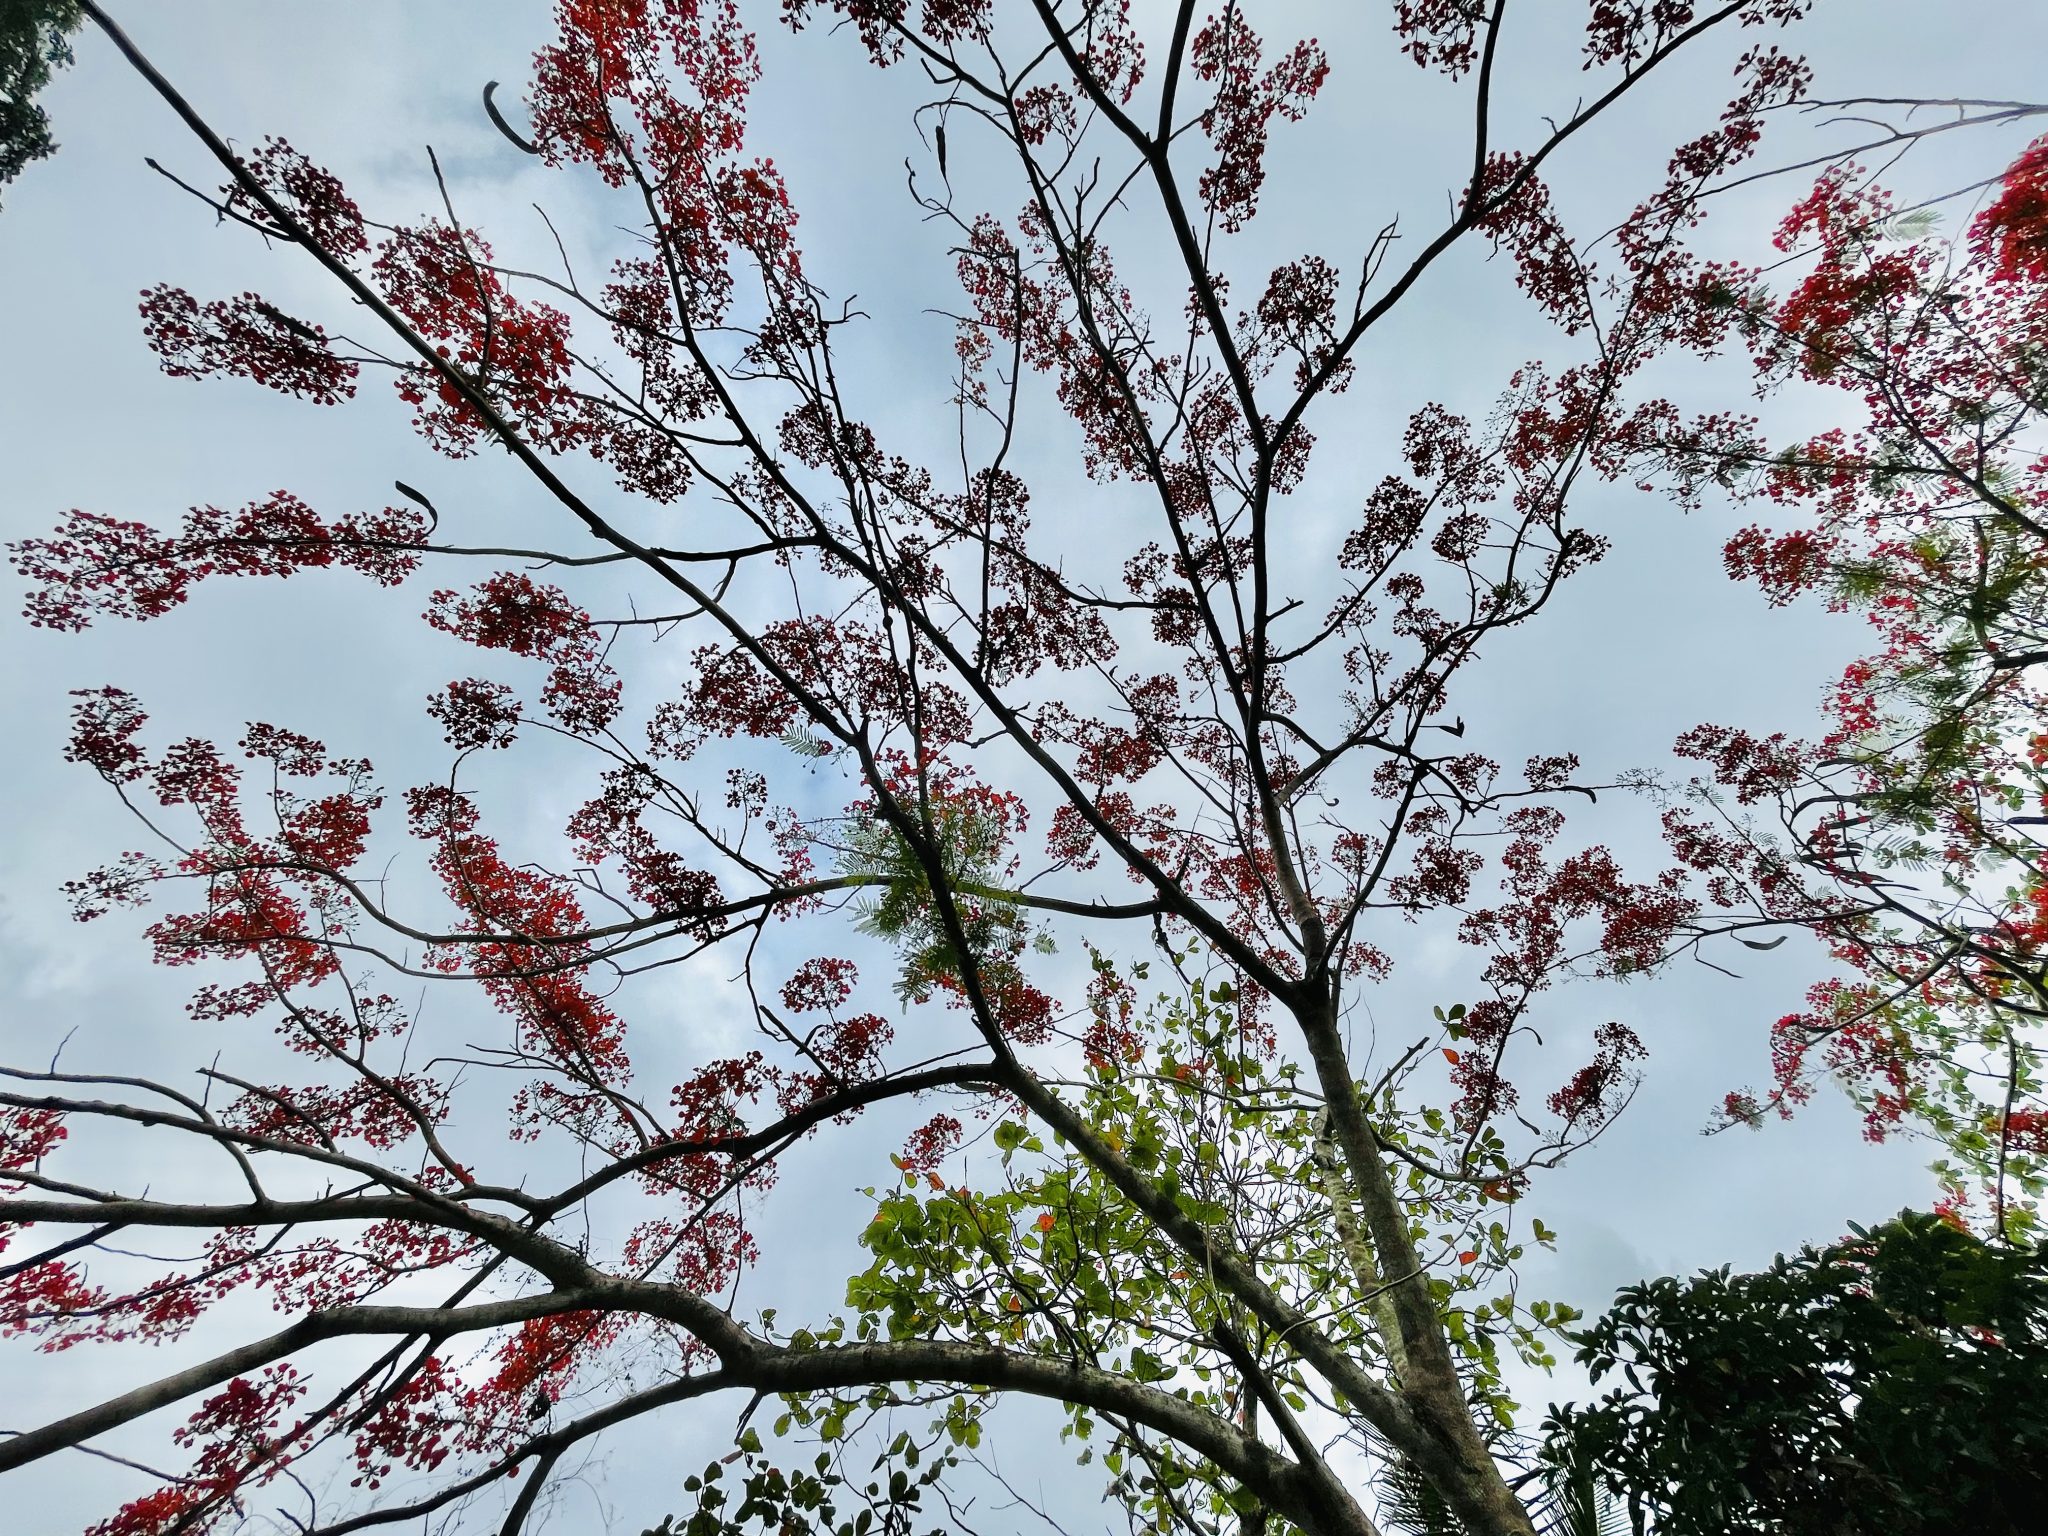 In India this tree is known as Gulmohar aka May flower. Original name is Delonix regia.Native to Madagascar. Normally it flourish in May here.

A view from the bottom of the tree. Photo is taken from Perumanna, Kozhikode, Kerala.